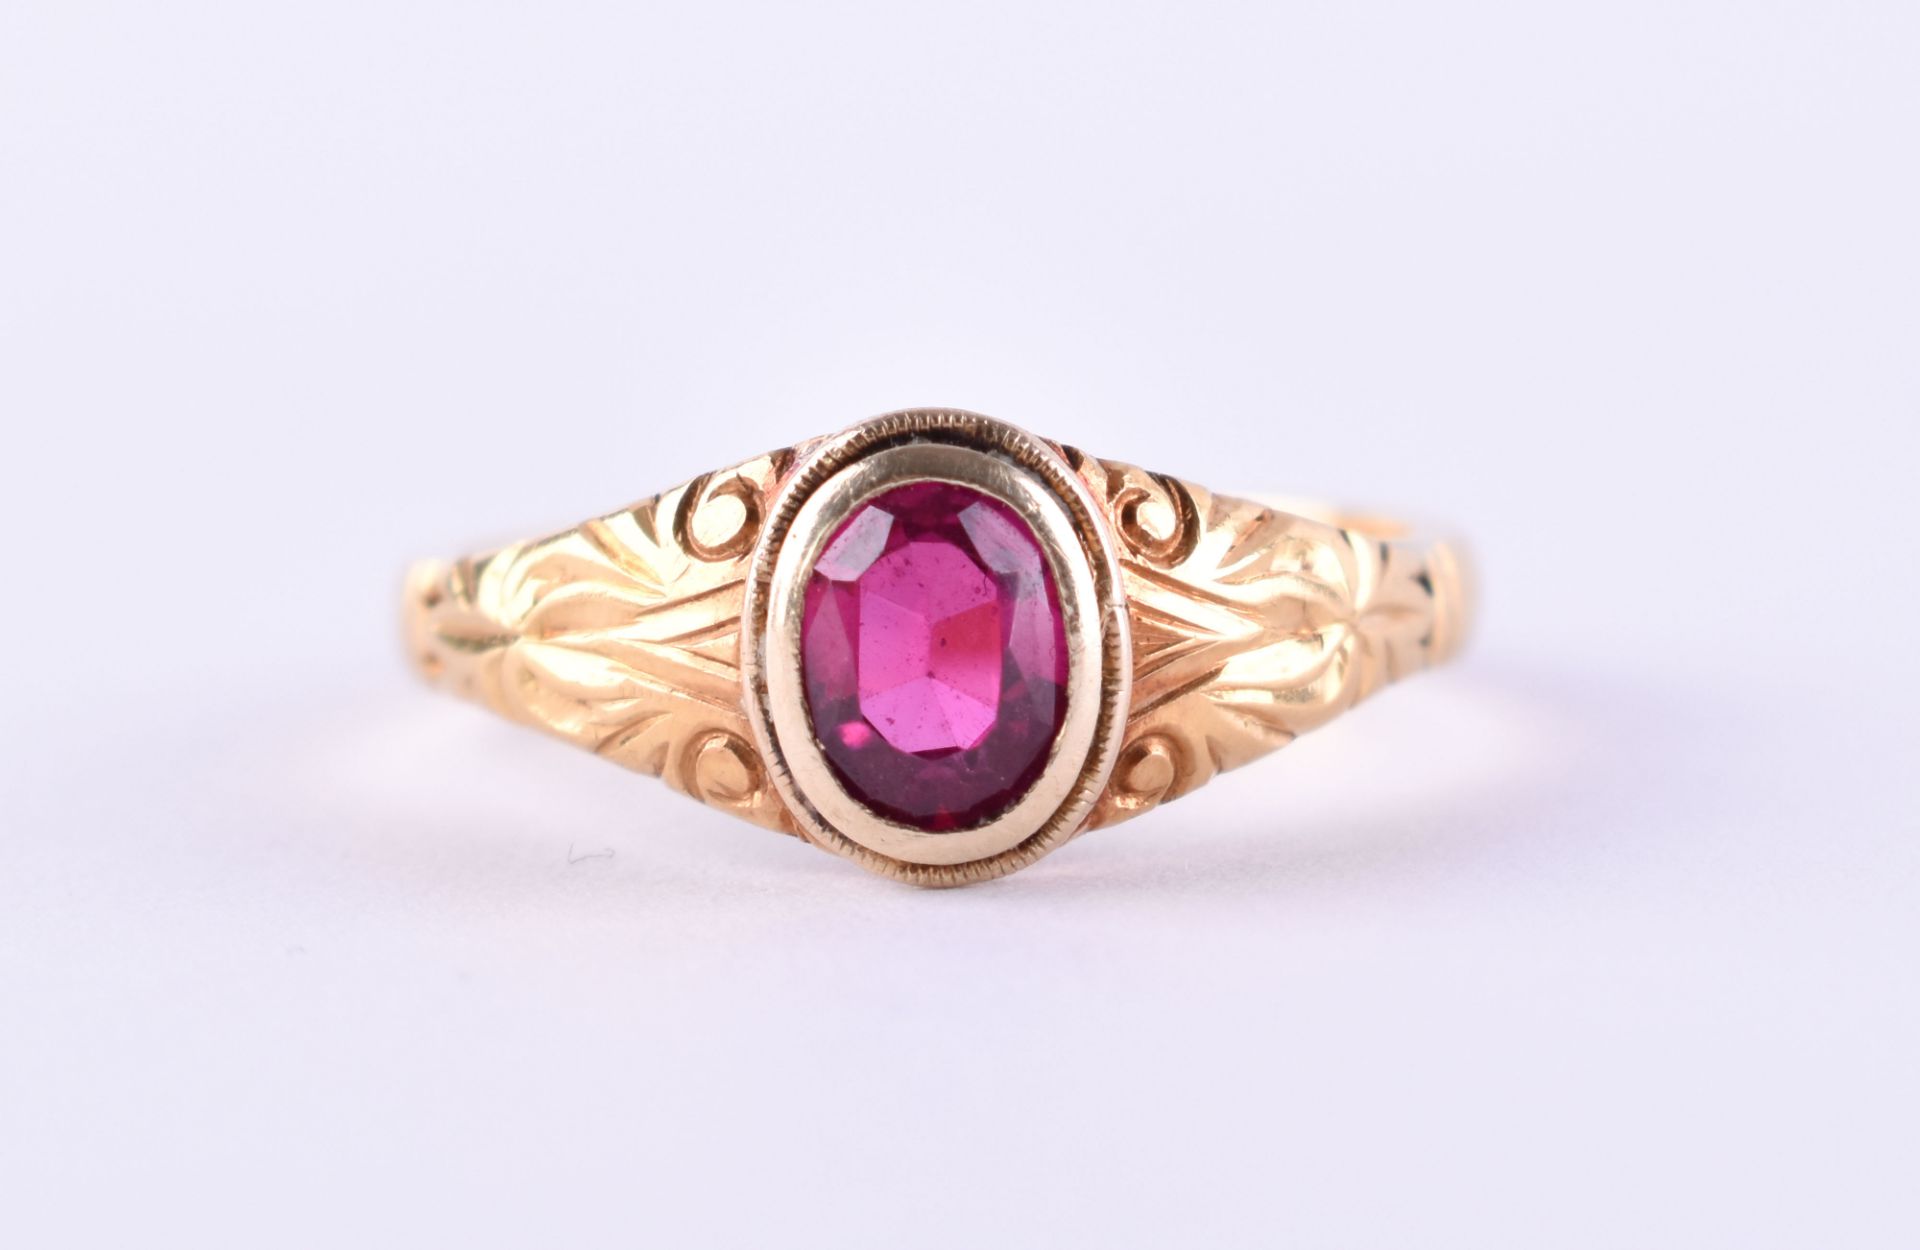 Ruby ring - Image 2 of 4